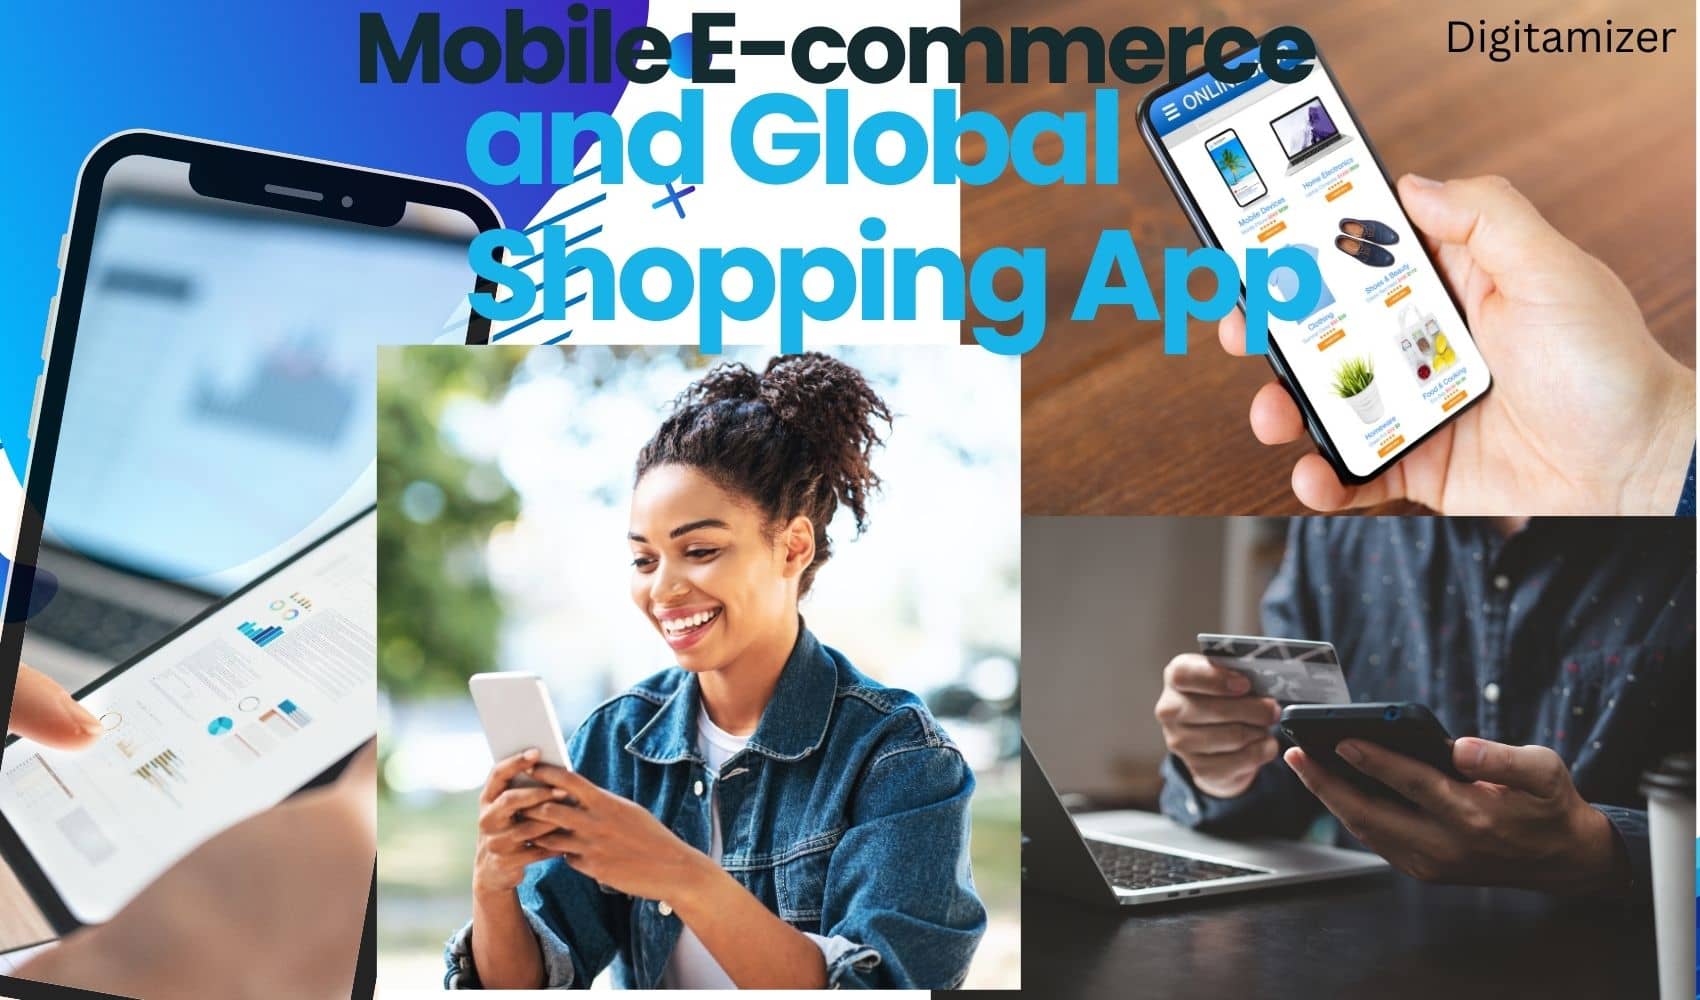 Mobile E-commerce and Global Shopping App